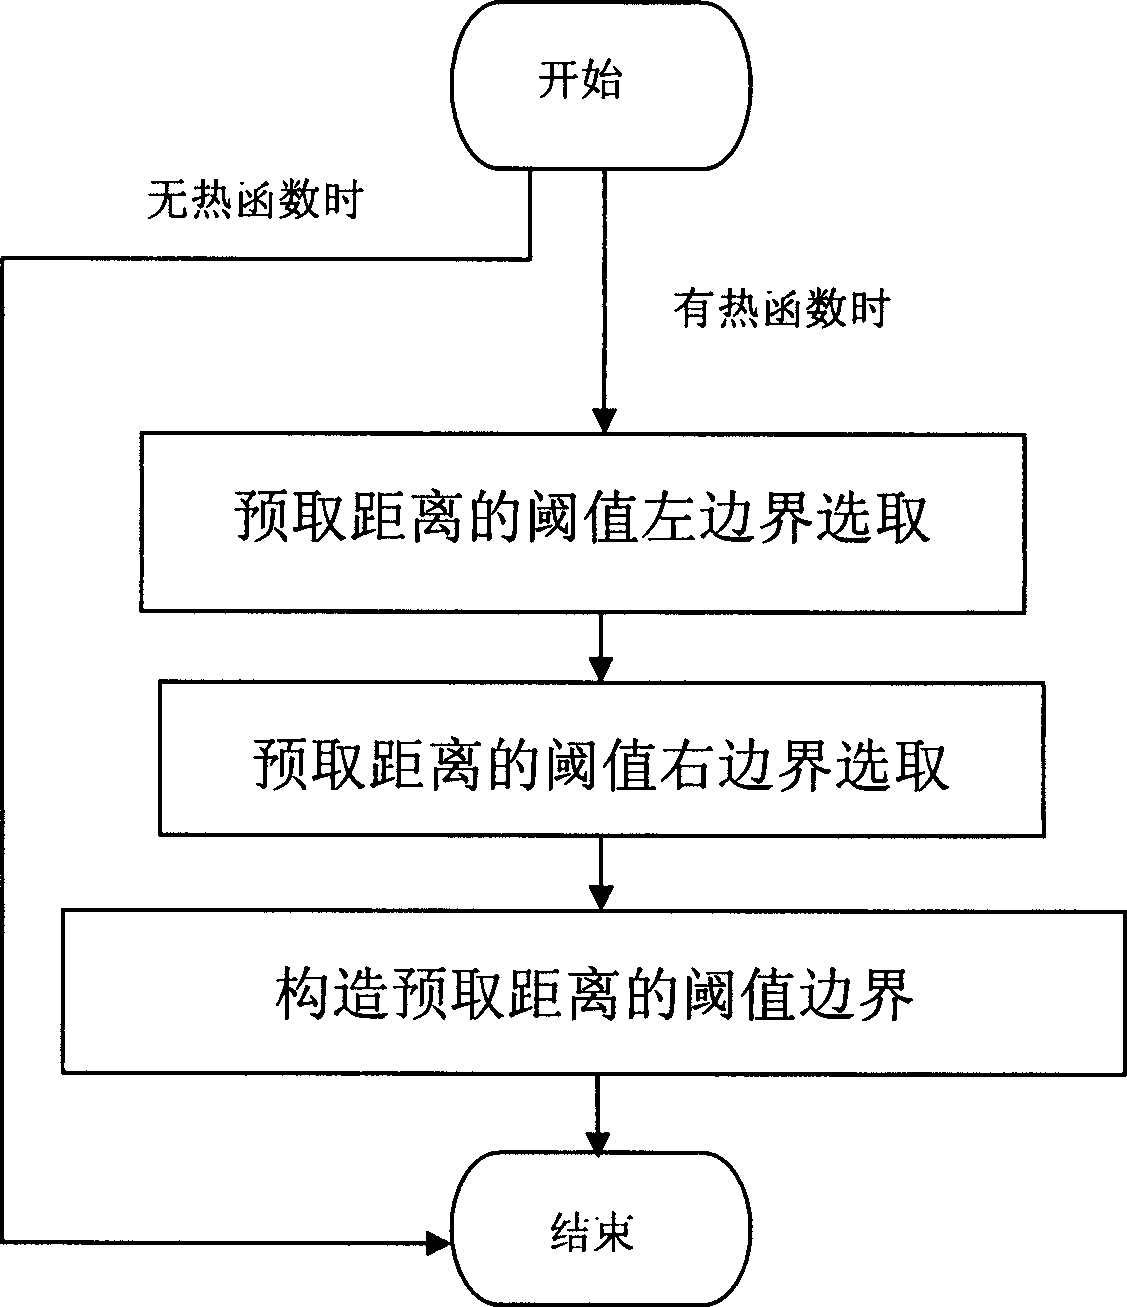 Threshold boundary selecting method for supporting helper thread pre-fetching distance parameters